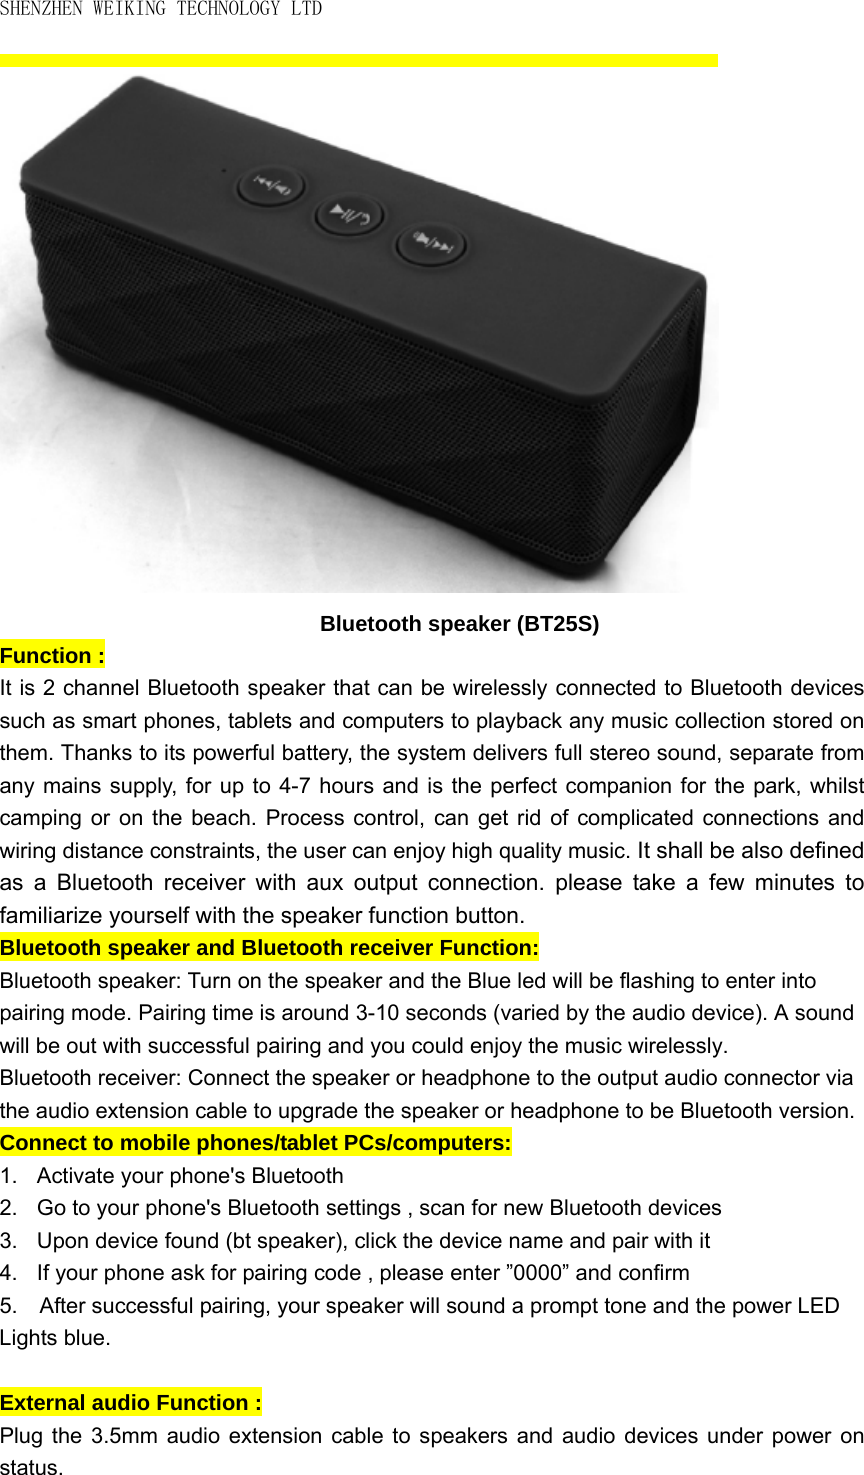 SHENZHEN WEIKING TECHNOLOGY LTD  Bluetooth speaker (BT25S) Function :   It is 2 channel Bluetooth speaker that can be wirelessly connected to Bluetooth devices such as smart phones, tablets and computers to playback any music collection stored on them. Thanks to its powerful battery, the system delivers full stereo sound, separate from any mains supply, for up to 4-7 hours and is the perfect companion for the park, whilst camping or on the beach. Process control, can get rid of complicated connections and wiring distance constraints, the user can enjoy high quality music. It shall be also defined as a Bluetooth receiver with aux output connection. please take a few minutes to familiarize yourself with the speaker function button.   Bluetooth speaker and Bluetooth receiver Function:   Bluetooth speaker: Turn on the speaker and the Blue led will be flashing to enter into pairing mode. Pairing time is around 3-10 seconds (varied by the audio device). A sound will be out with successful pairing and you could enjoy the music wirelessly. Bluetooth receiver: Connect the speaker or headphone to the output audio connector via the audio extension cable to upgrade the speaker or headphone to be Bluetooth version. Connect to mobile phones/tablet PCs/computers:   1.  Activate your phone&apos;s Bluetooth 2.  Go to your phone&apos;s Bluetooth settings , scan for new Bluetooth devices   3.  Upon device found (bt speaker), click the device name and pair with it 4.  If your phone ask for pairing code , please enter ”0000” and confirm 5.  After successful pairing, your speaker will sound a prompt tone and the power LED   Lights blue.  External audio Function :   Plug the 3.5mm audio extension cable to speakers and audio devices under power on status.  